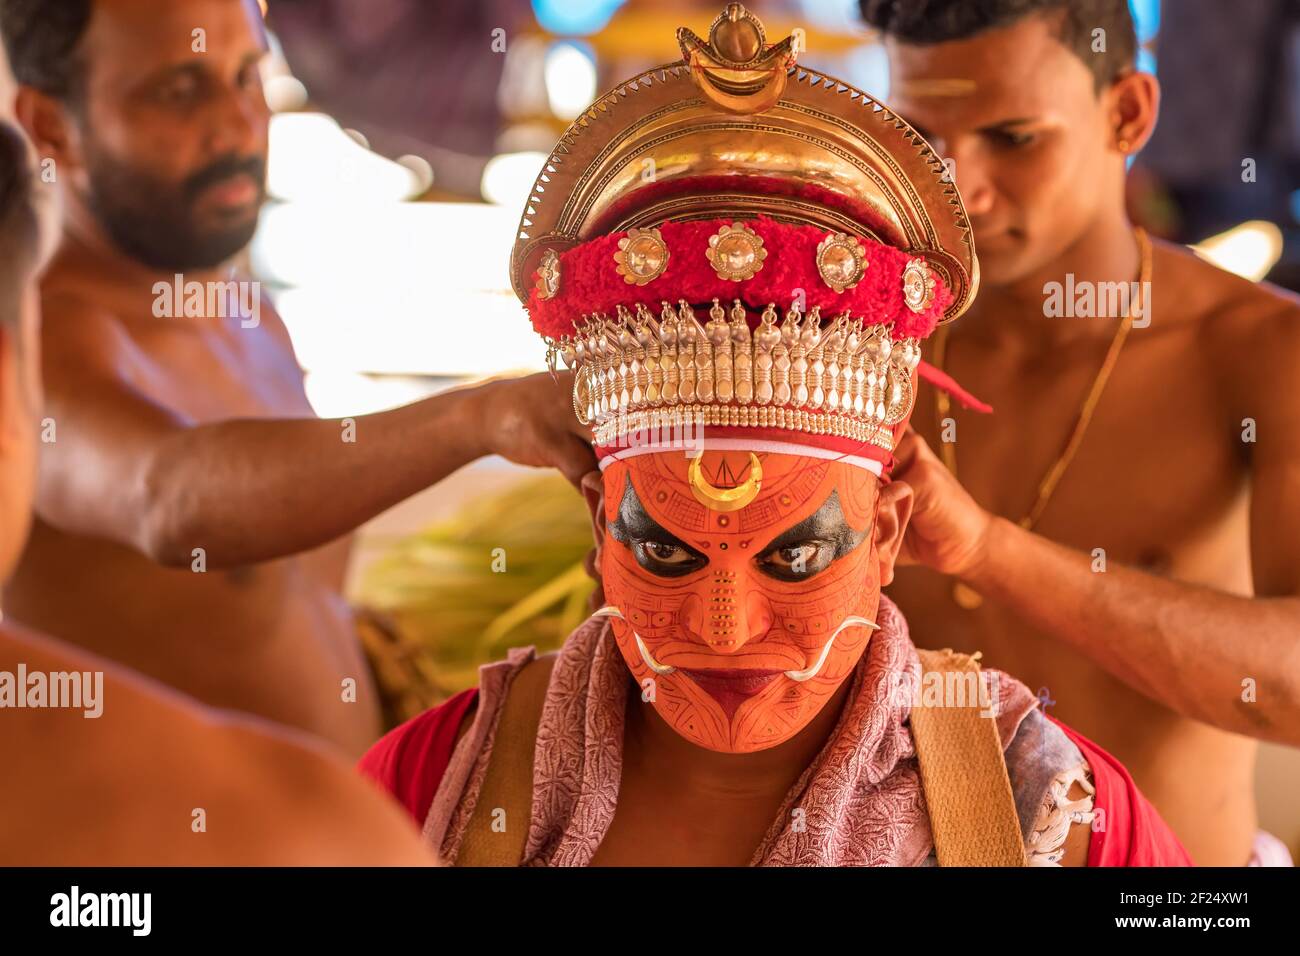 Payyanur, India - December 5, 2019: Portrait of an unidentified Theyyam dancer during temple festival in Payyanur, Kerala, India. Theyyam is a popular Stock Photo